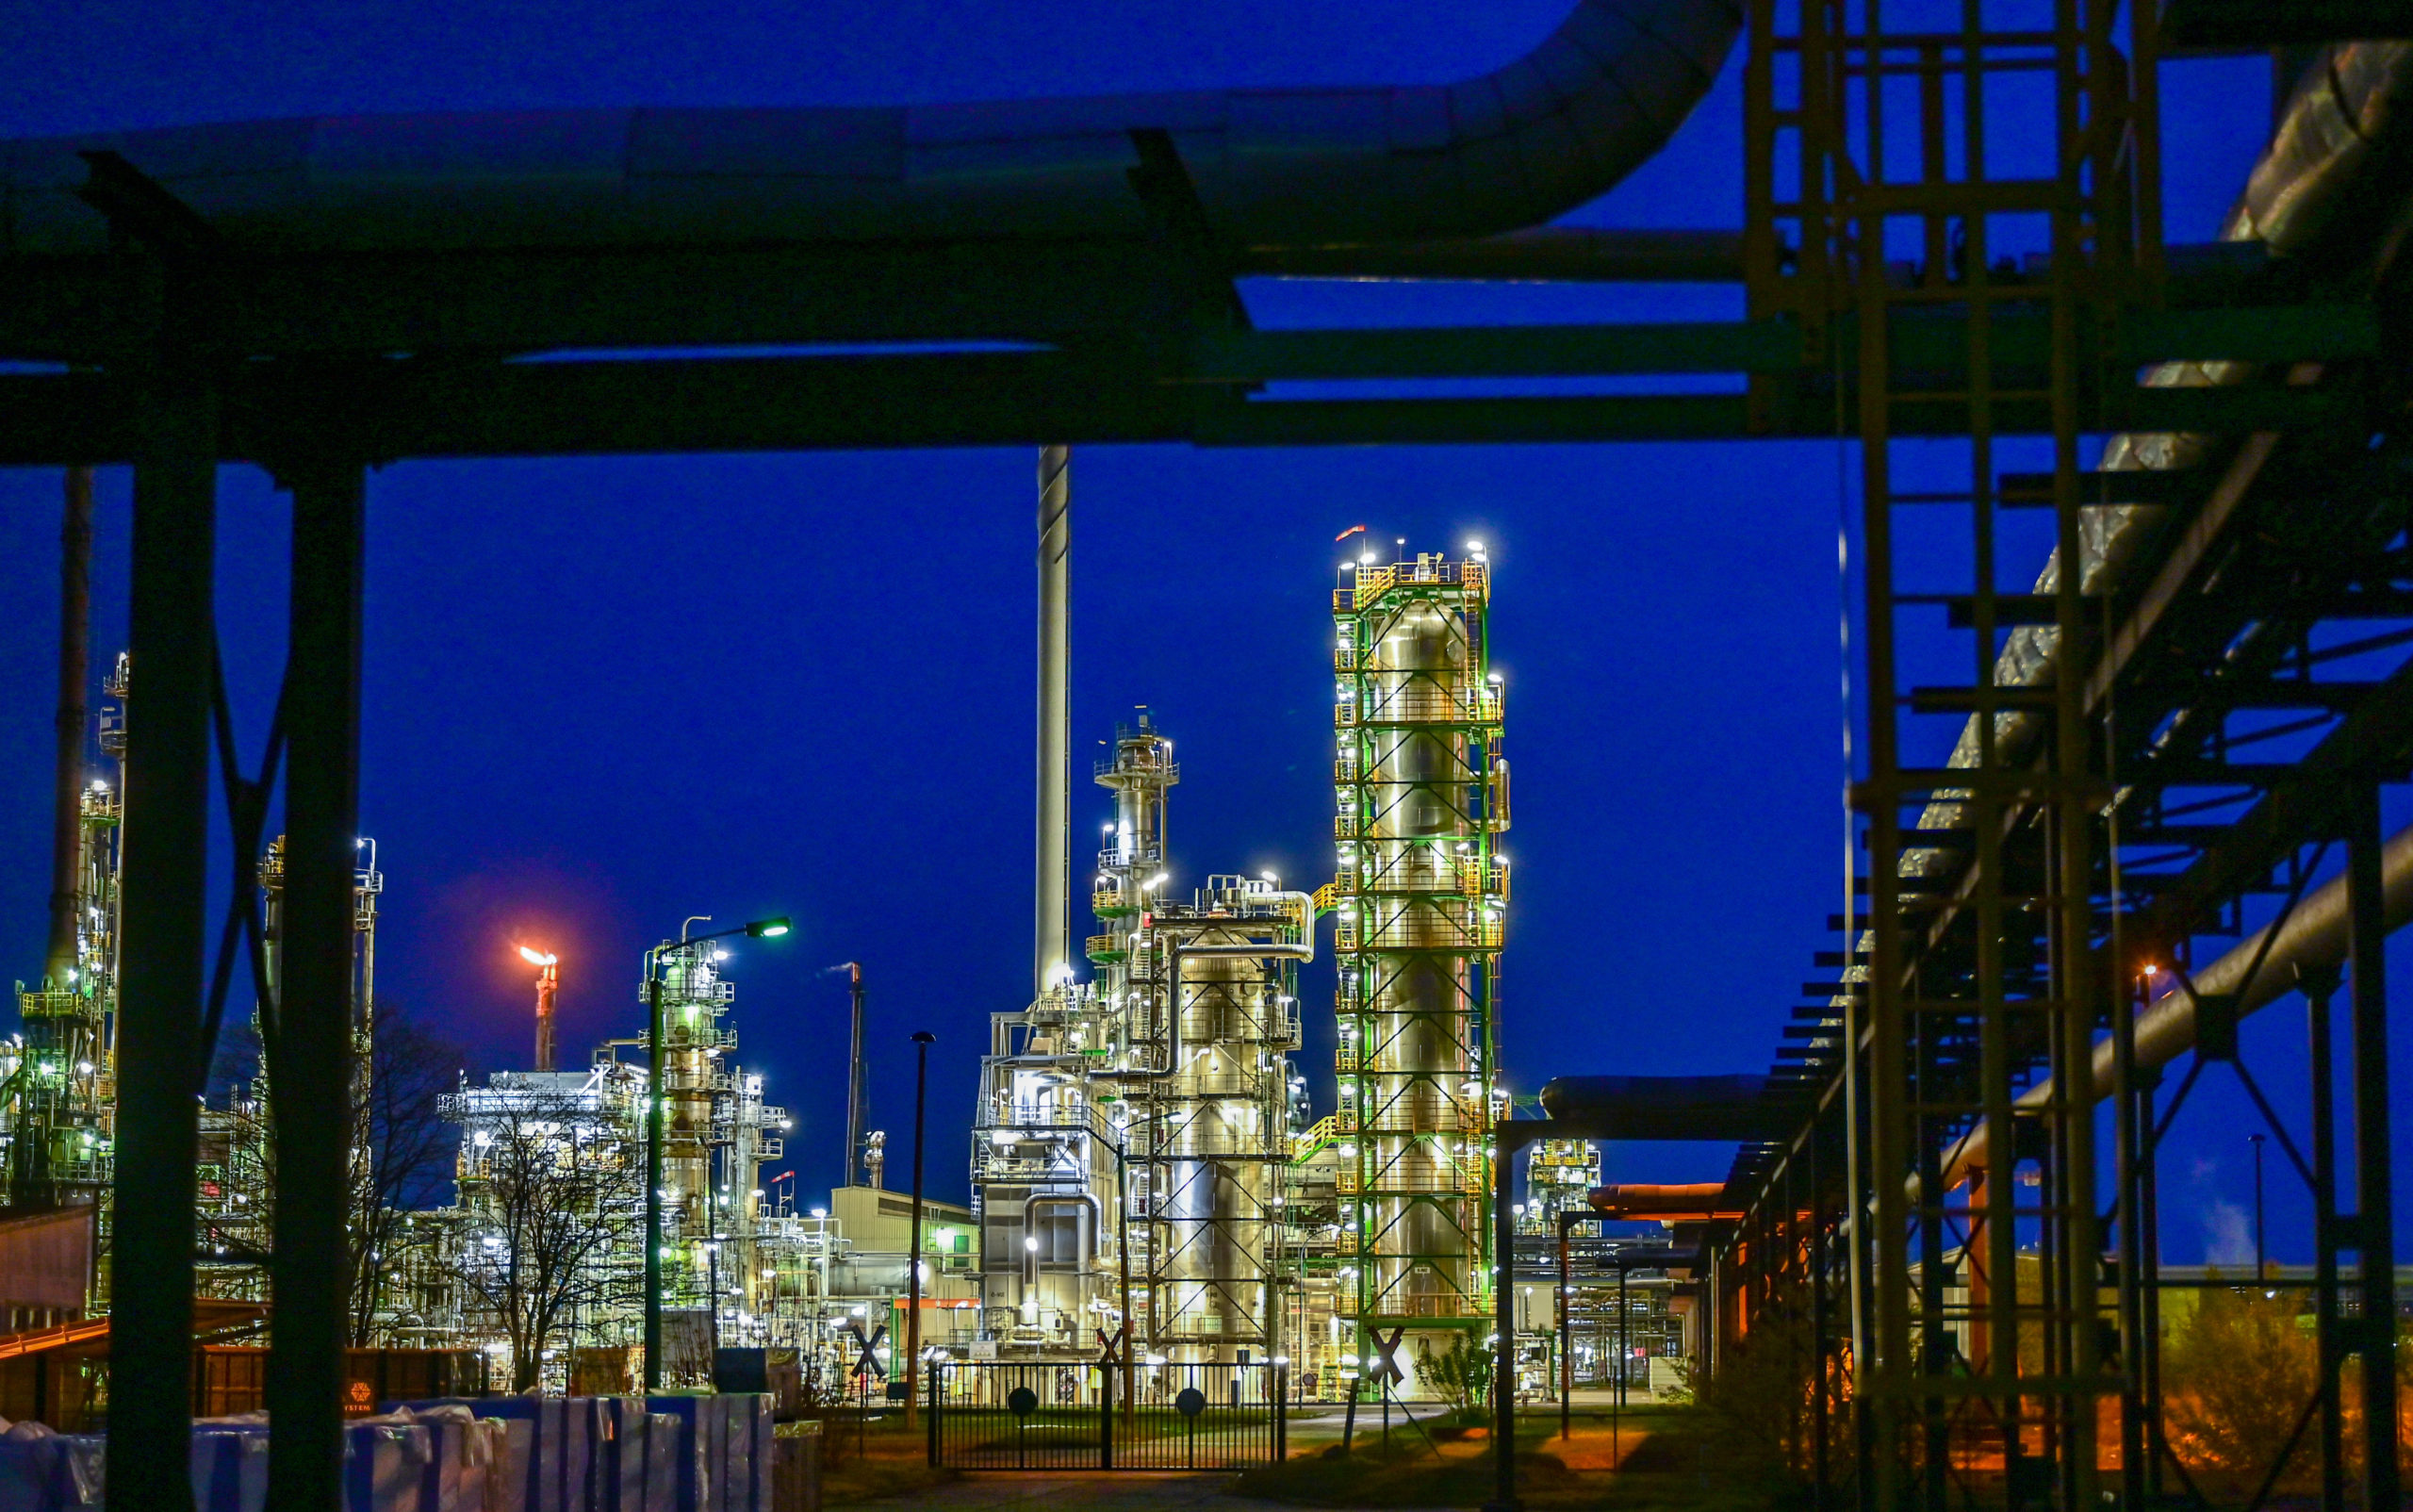 The facilities of the oil refinery on the industrial site of PCK-Raffinerie GmbH are illuminated in...